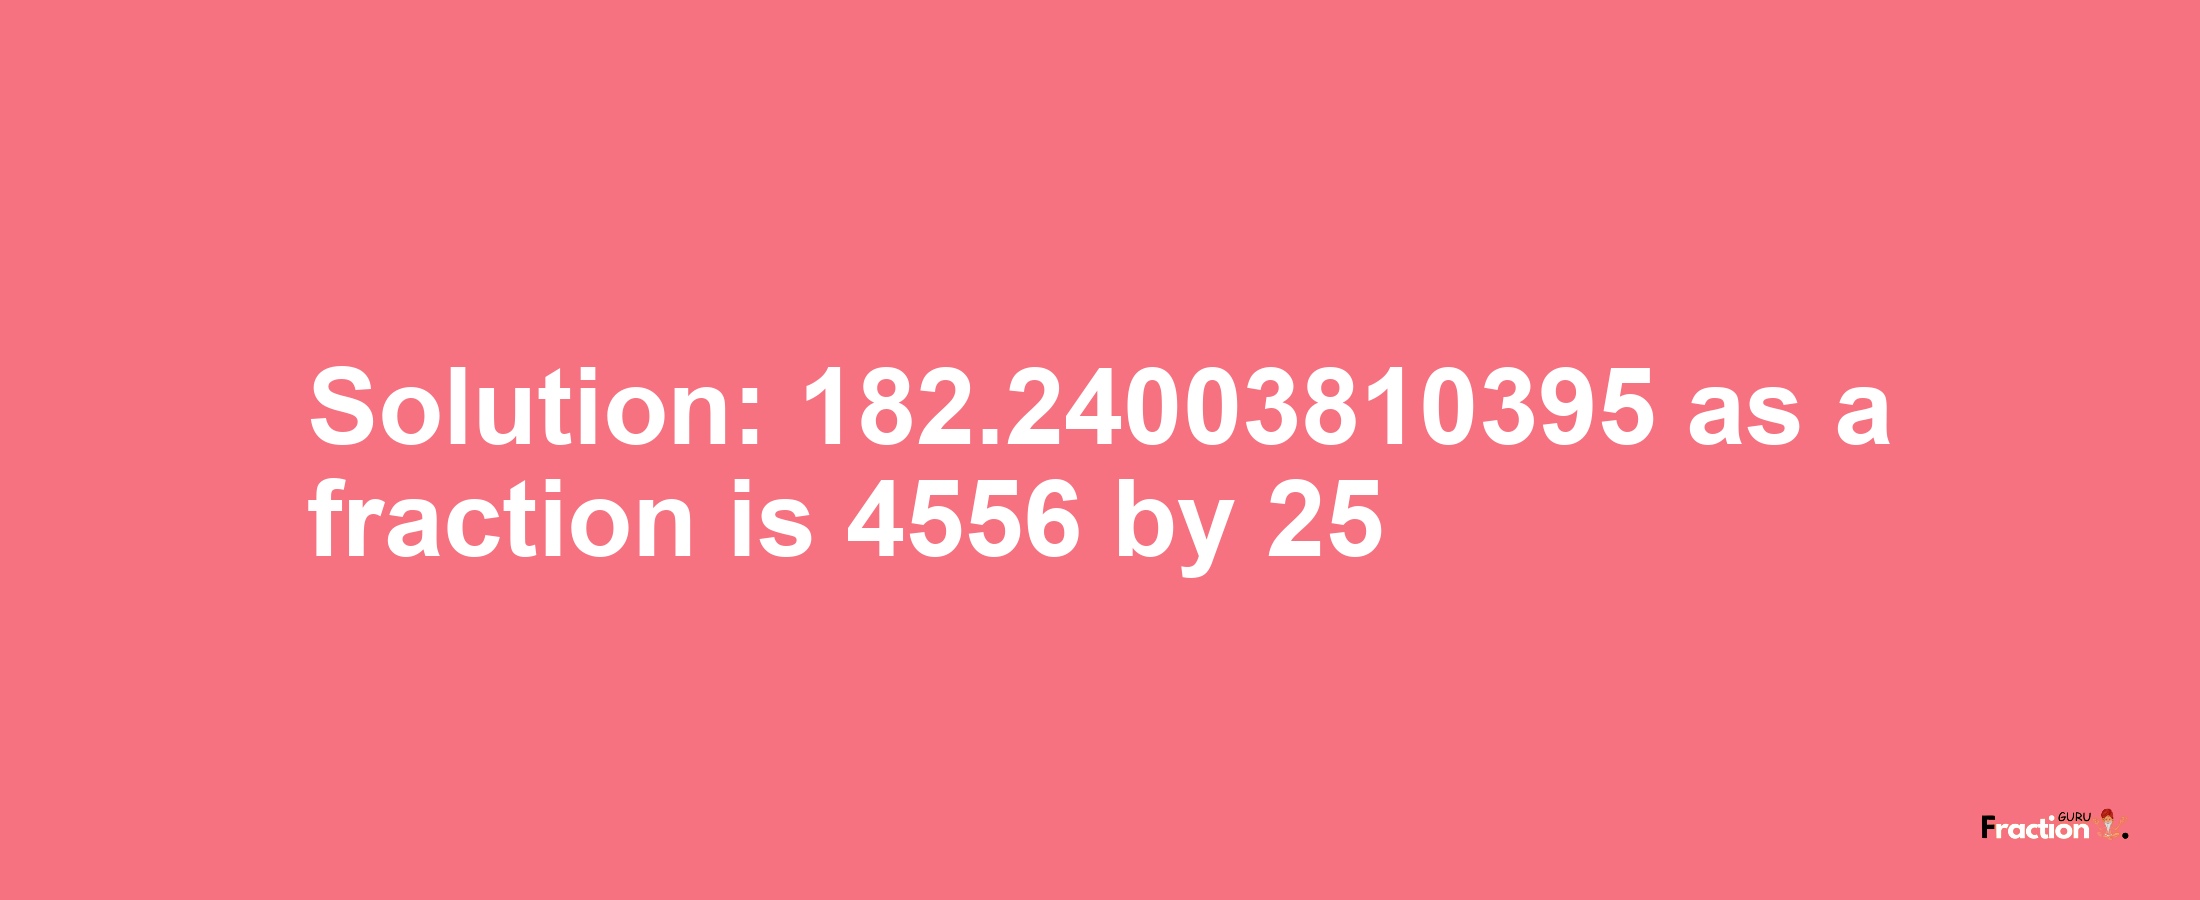 Solution:182.24003810395 as a fraction is 4556/25